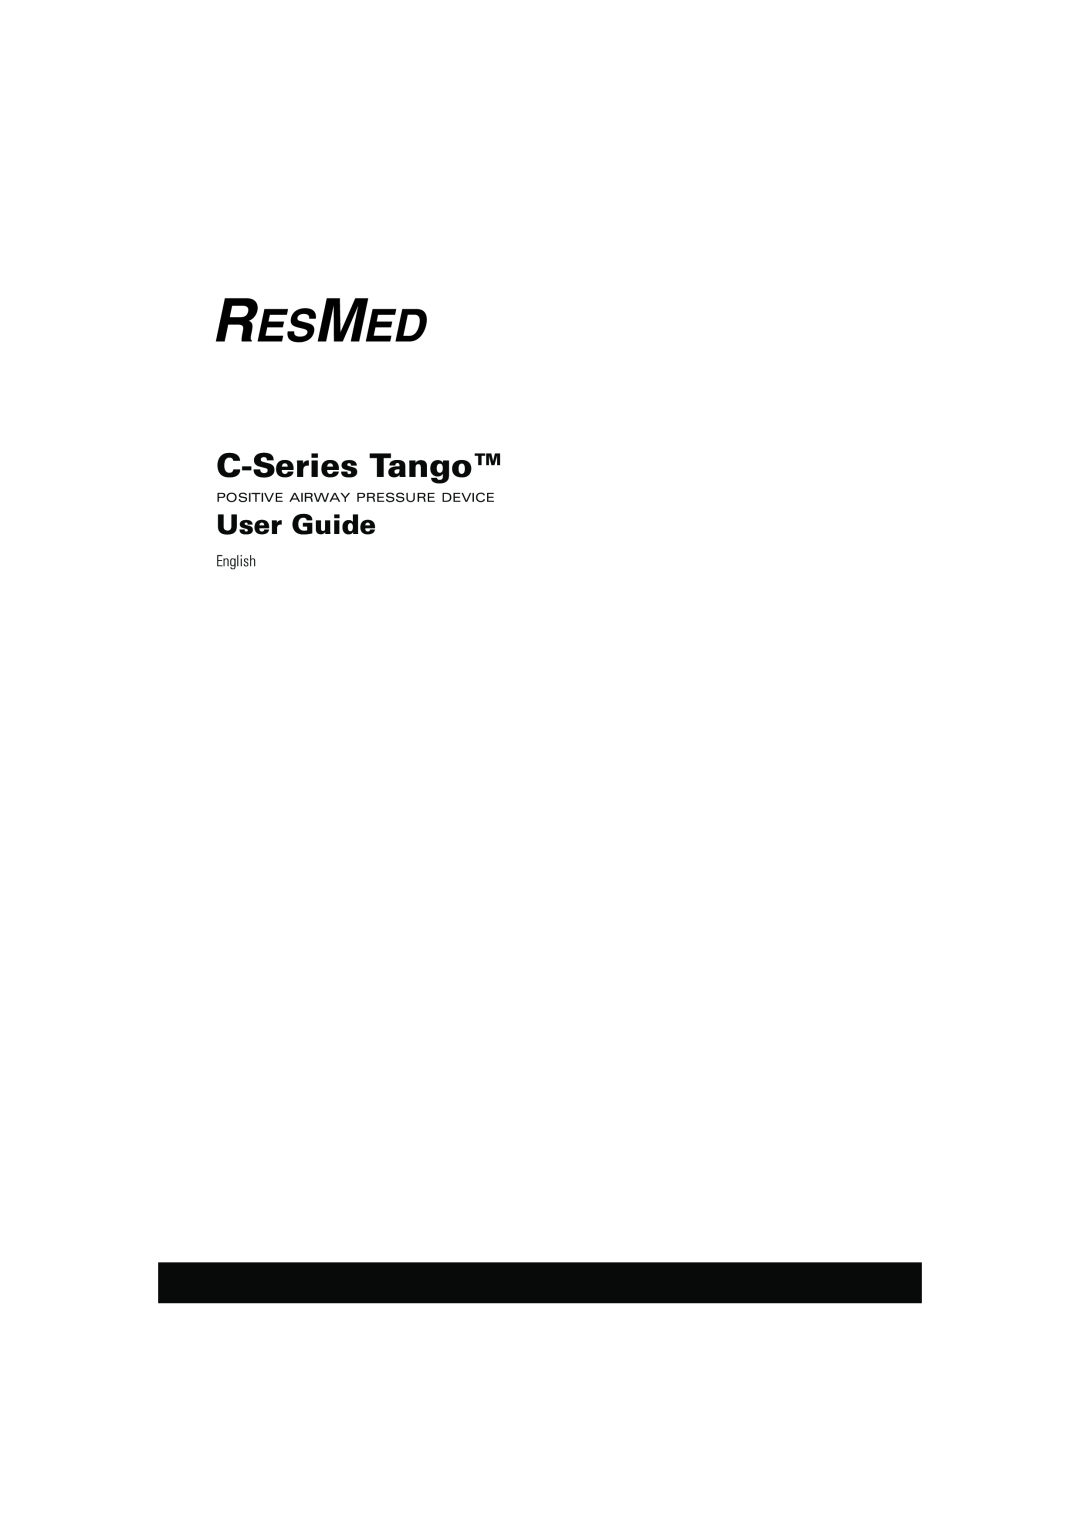 ResMed technical specifications C-SeriesHeated Humidifier, User Guide 